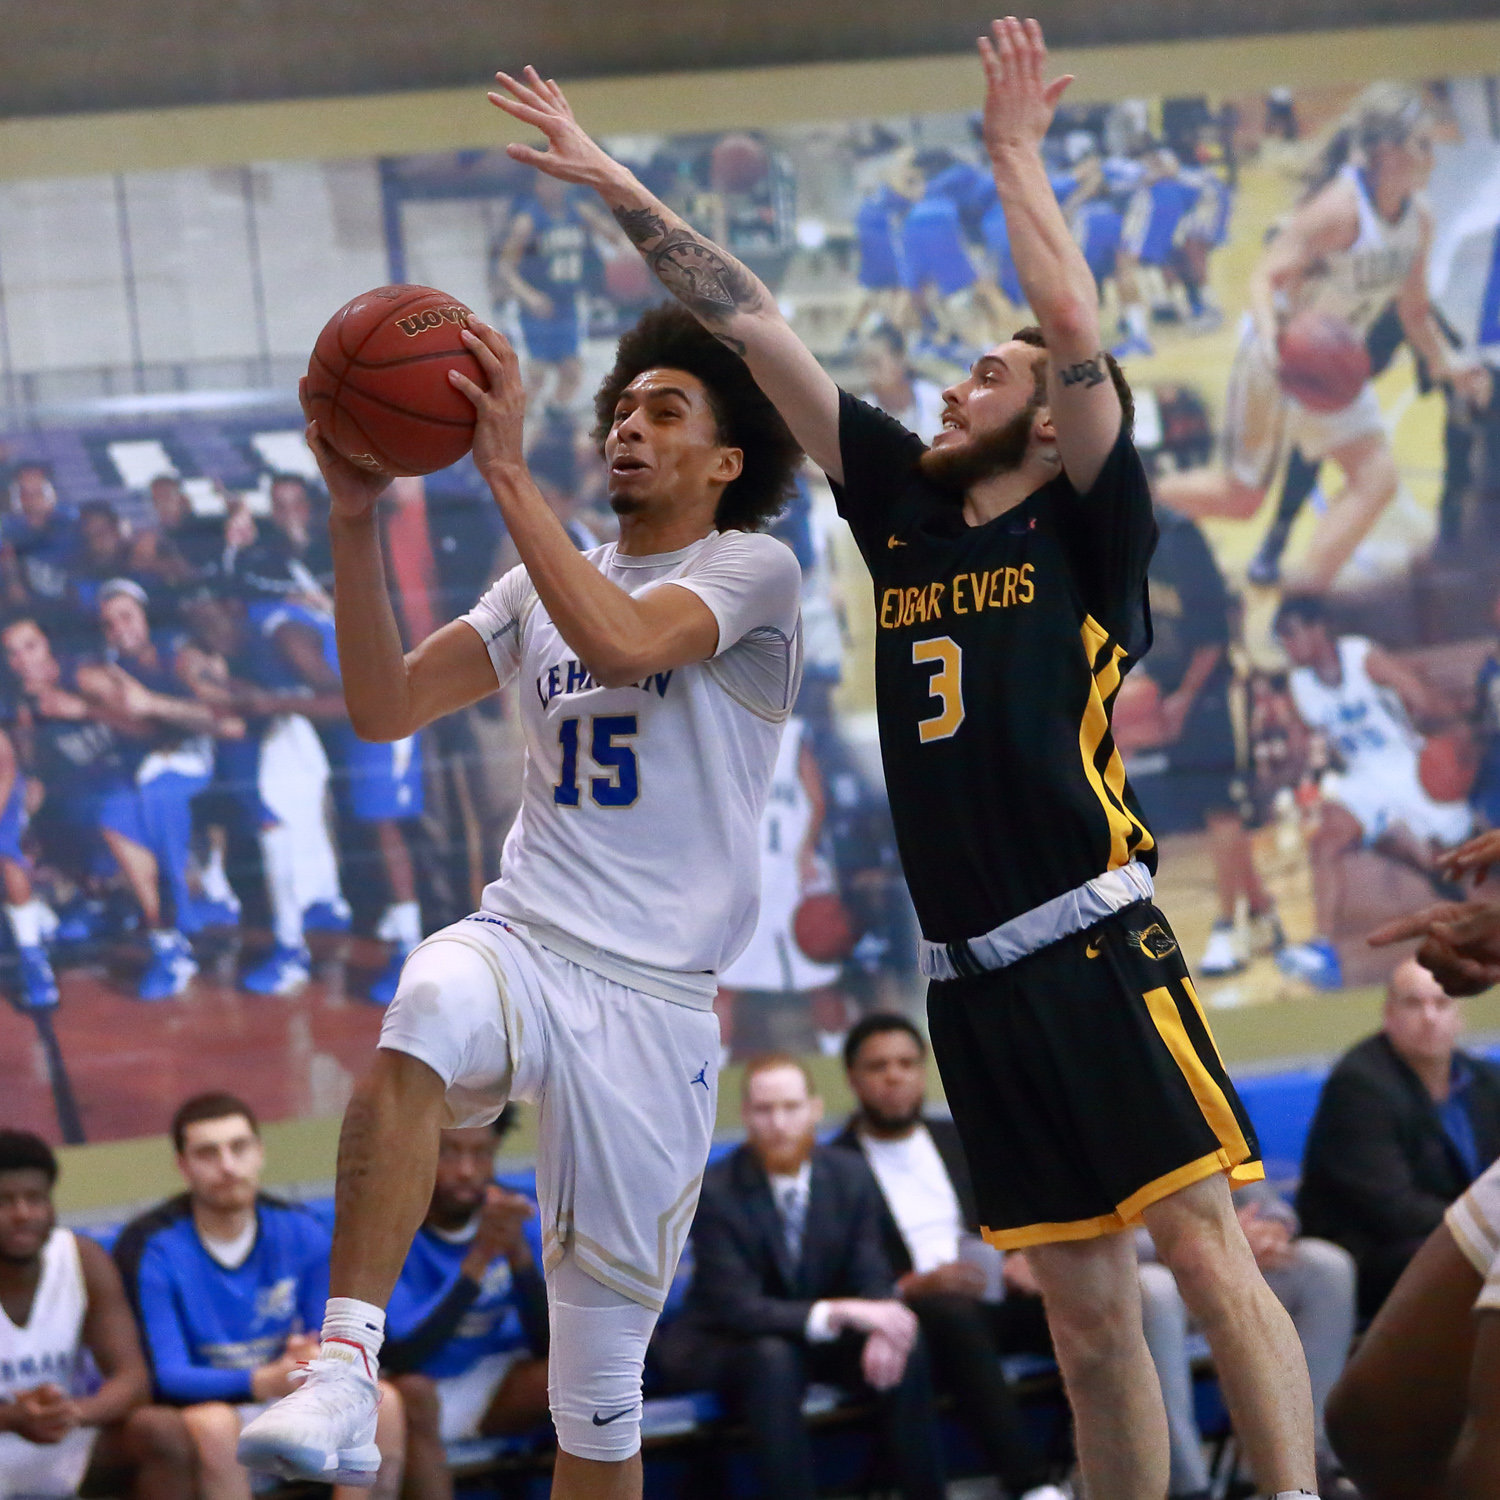 Some hot shooting down the stretch by Gian Batista helped fuel a late Lehman rally and lead the Lightning to a win over Medgar Evers.